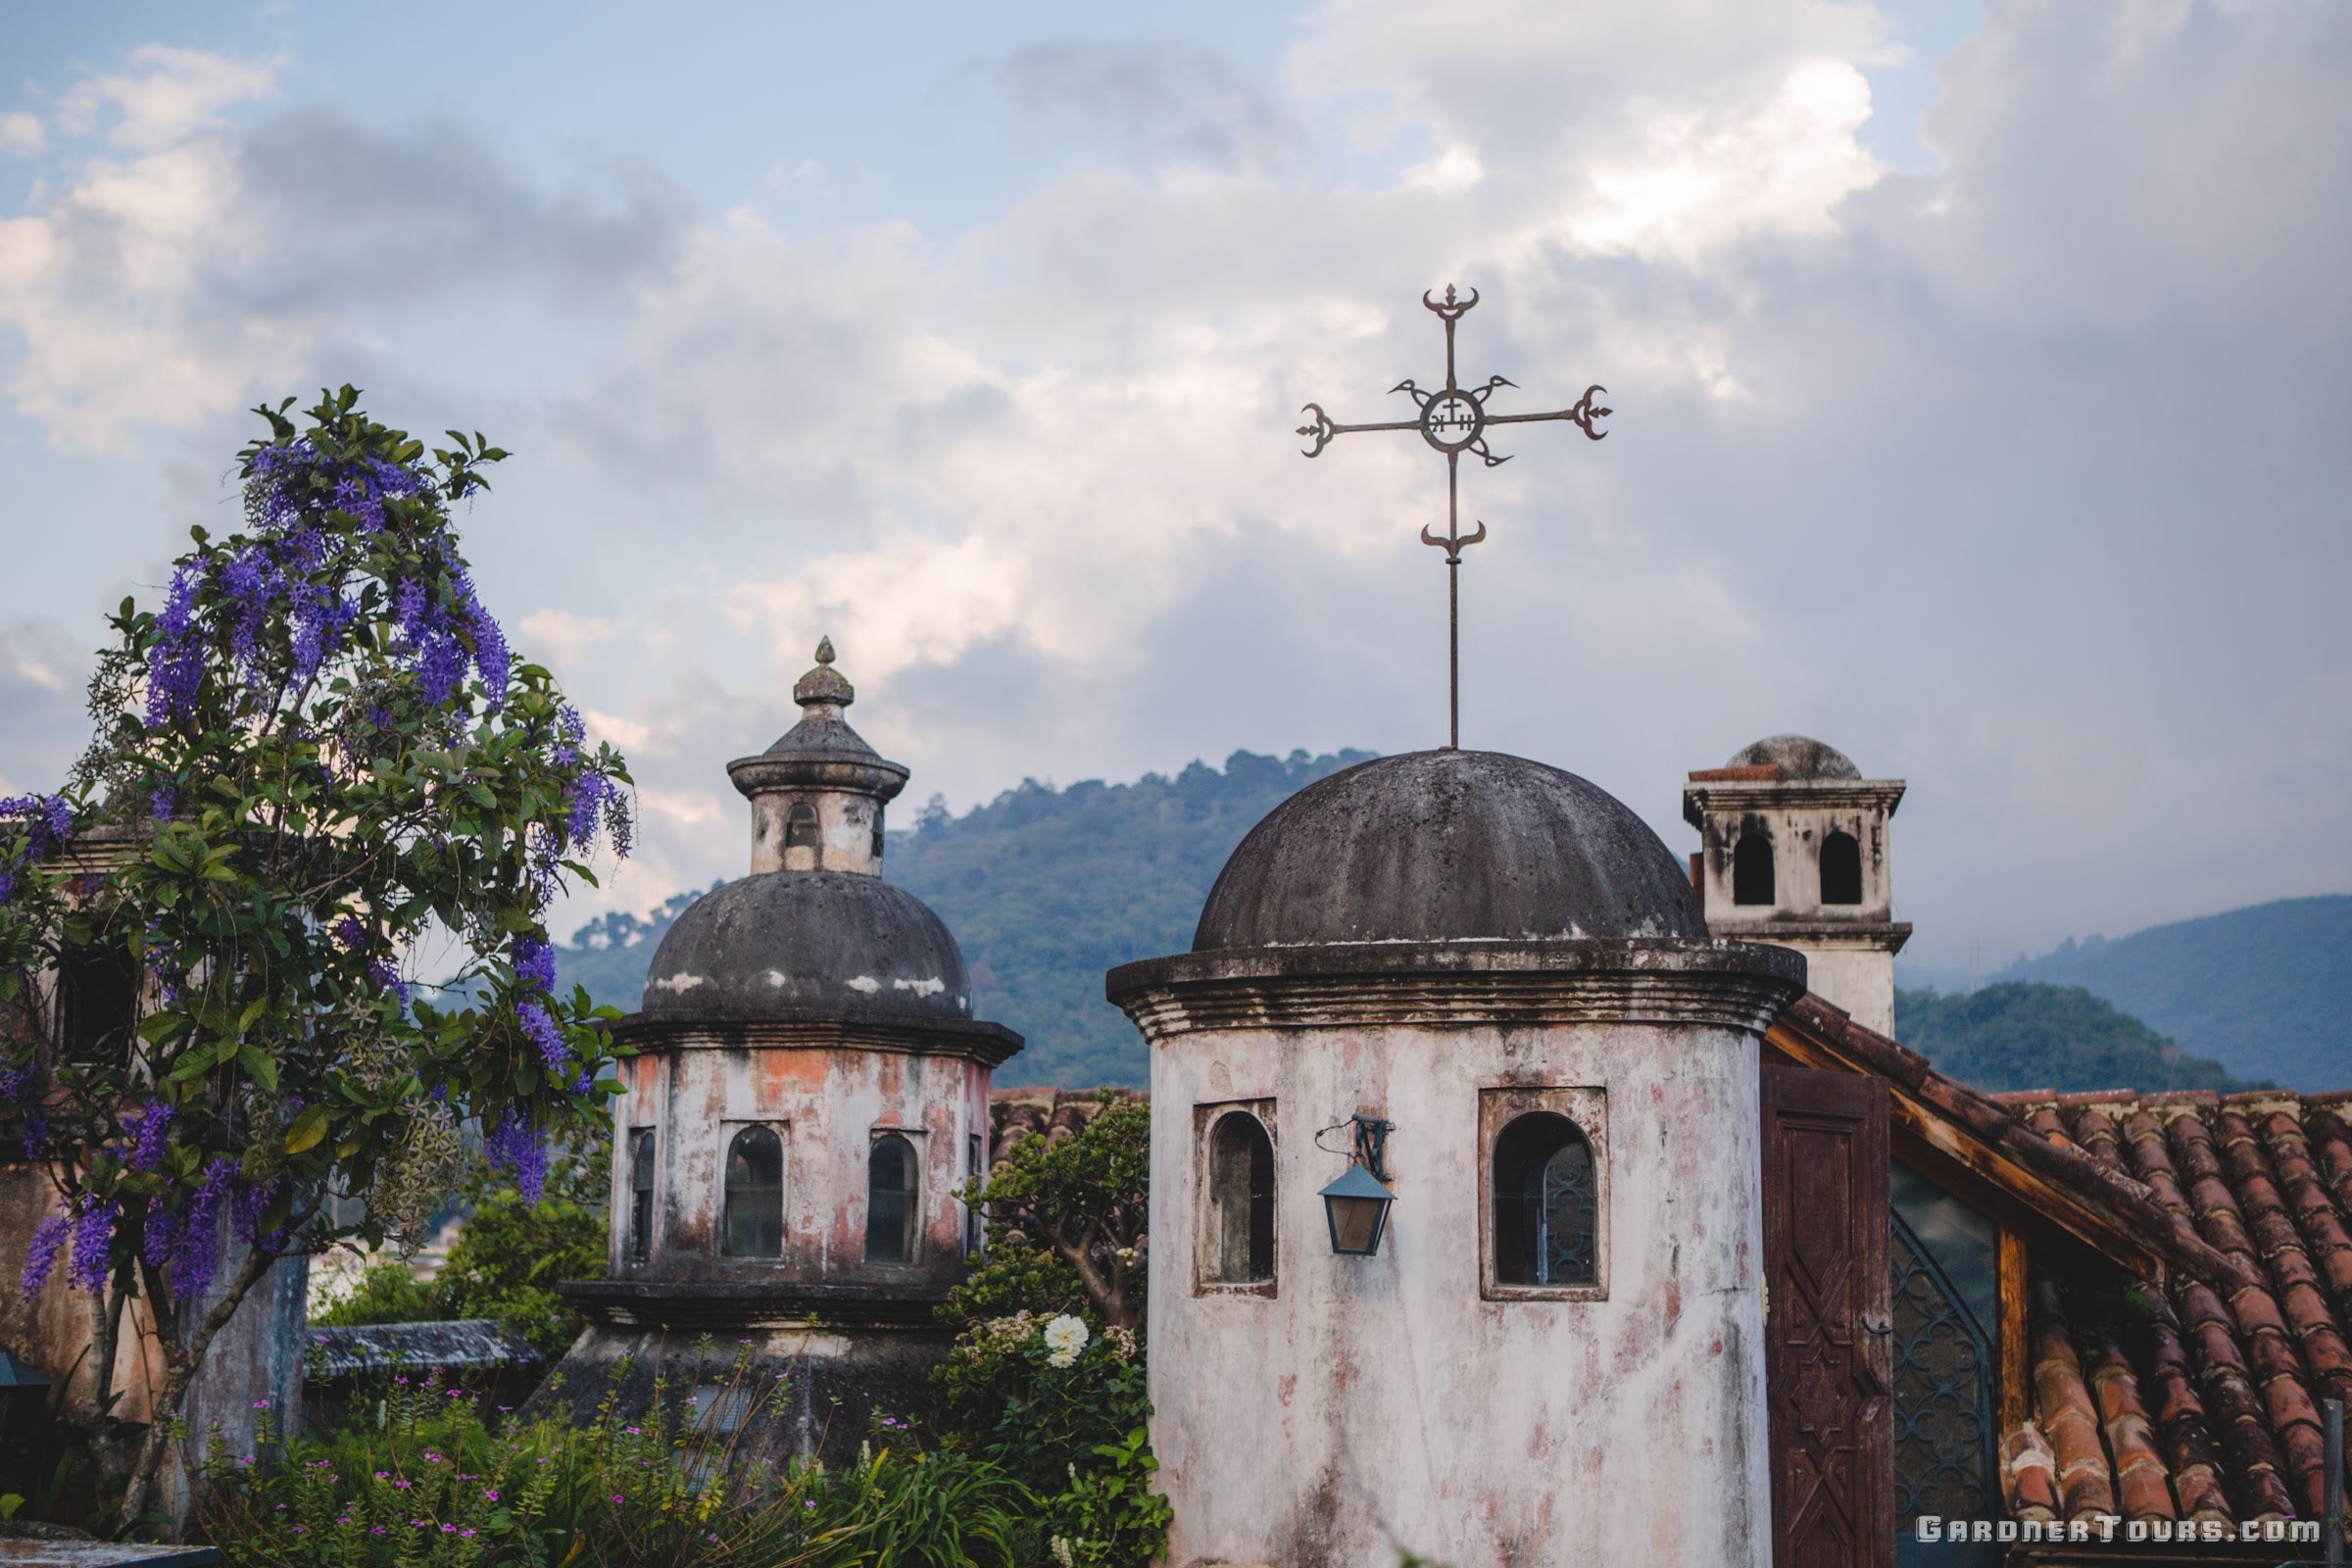 Colorful Rooftop View with Crosses on the Rooftops in Antigua, Guatemala